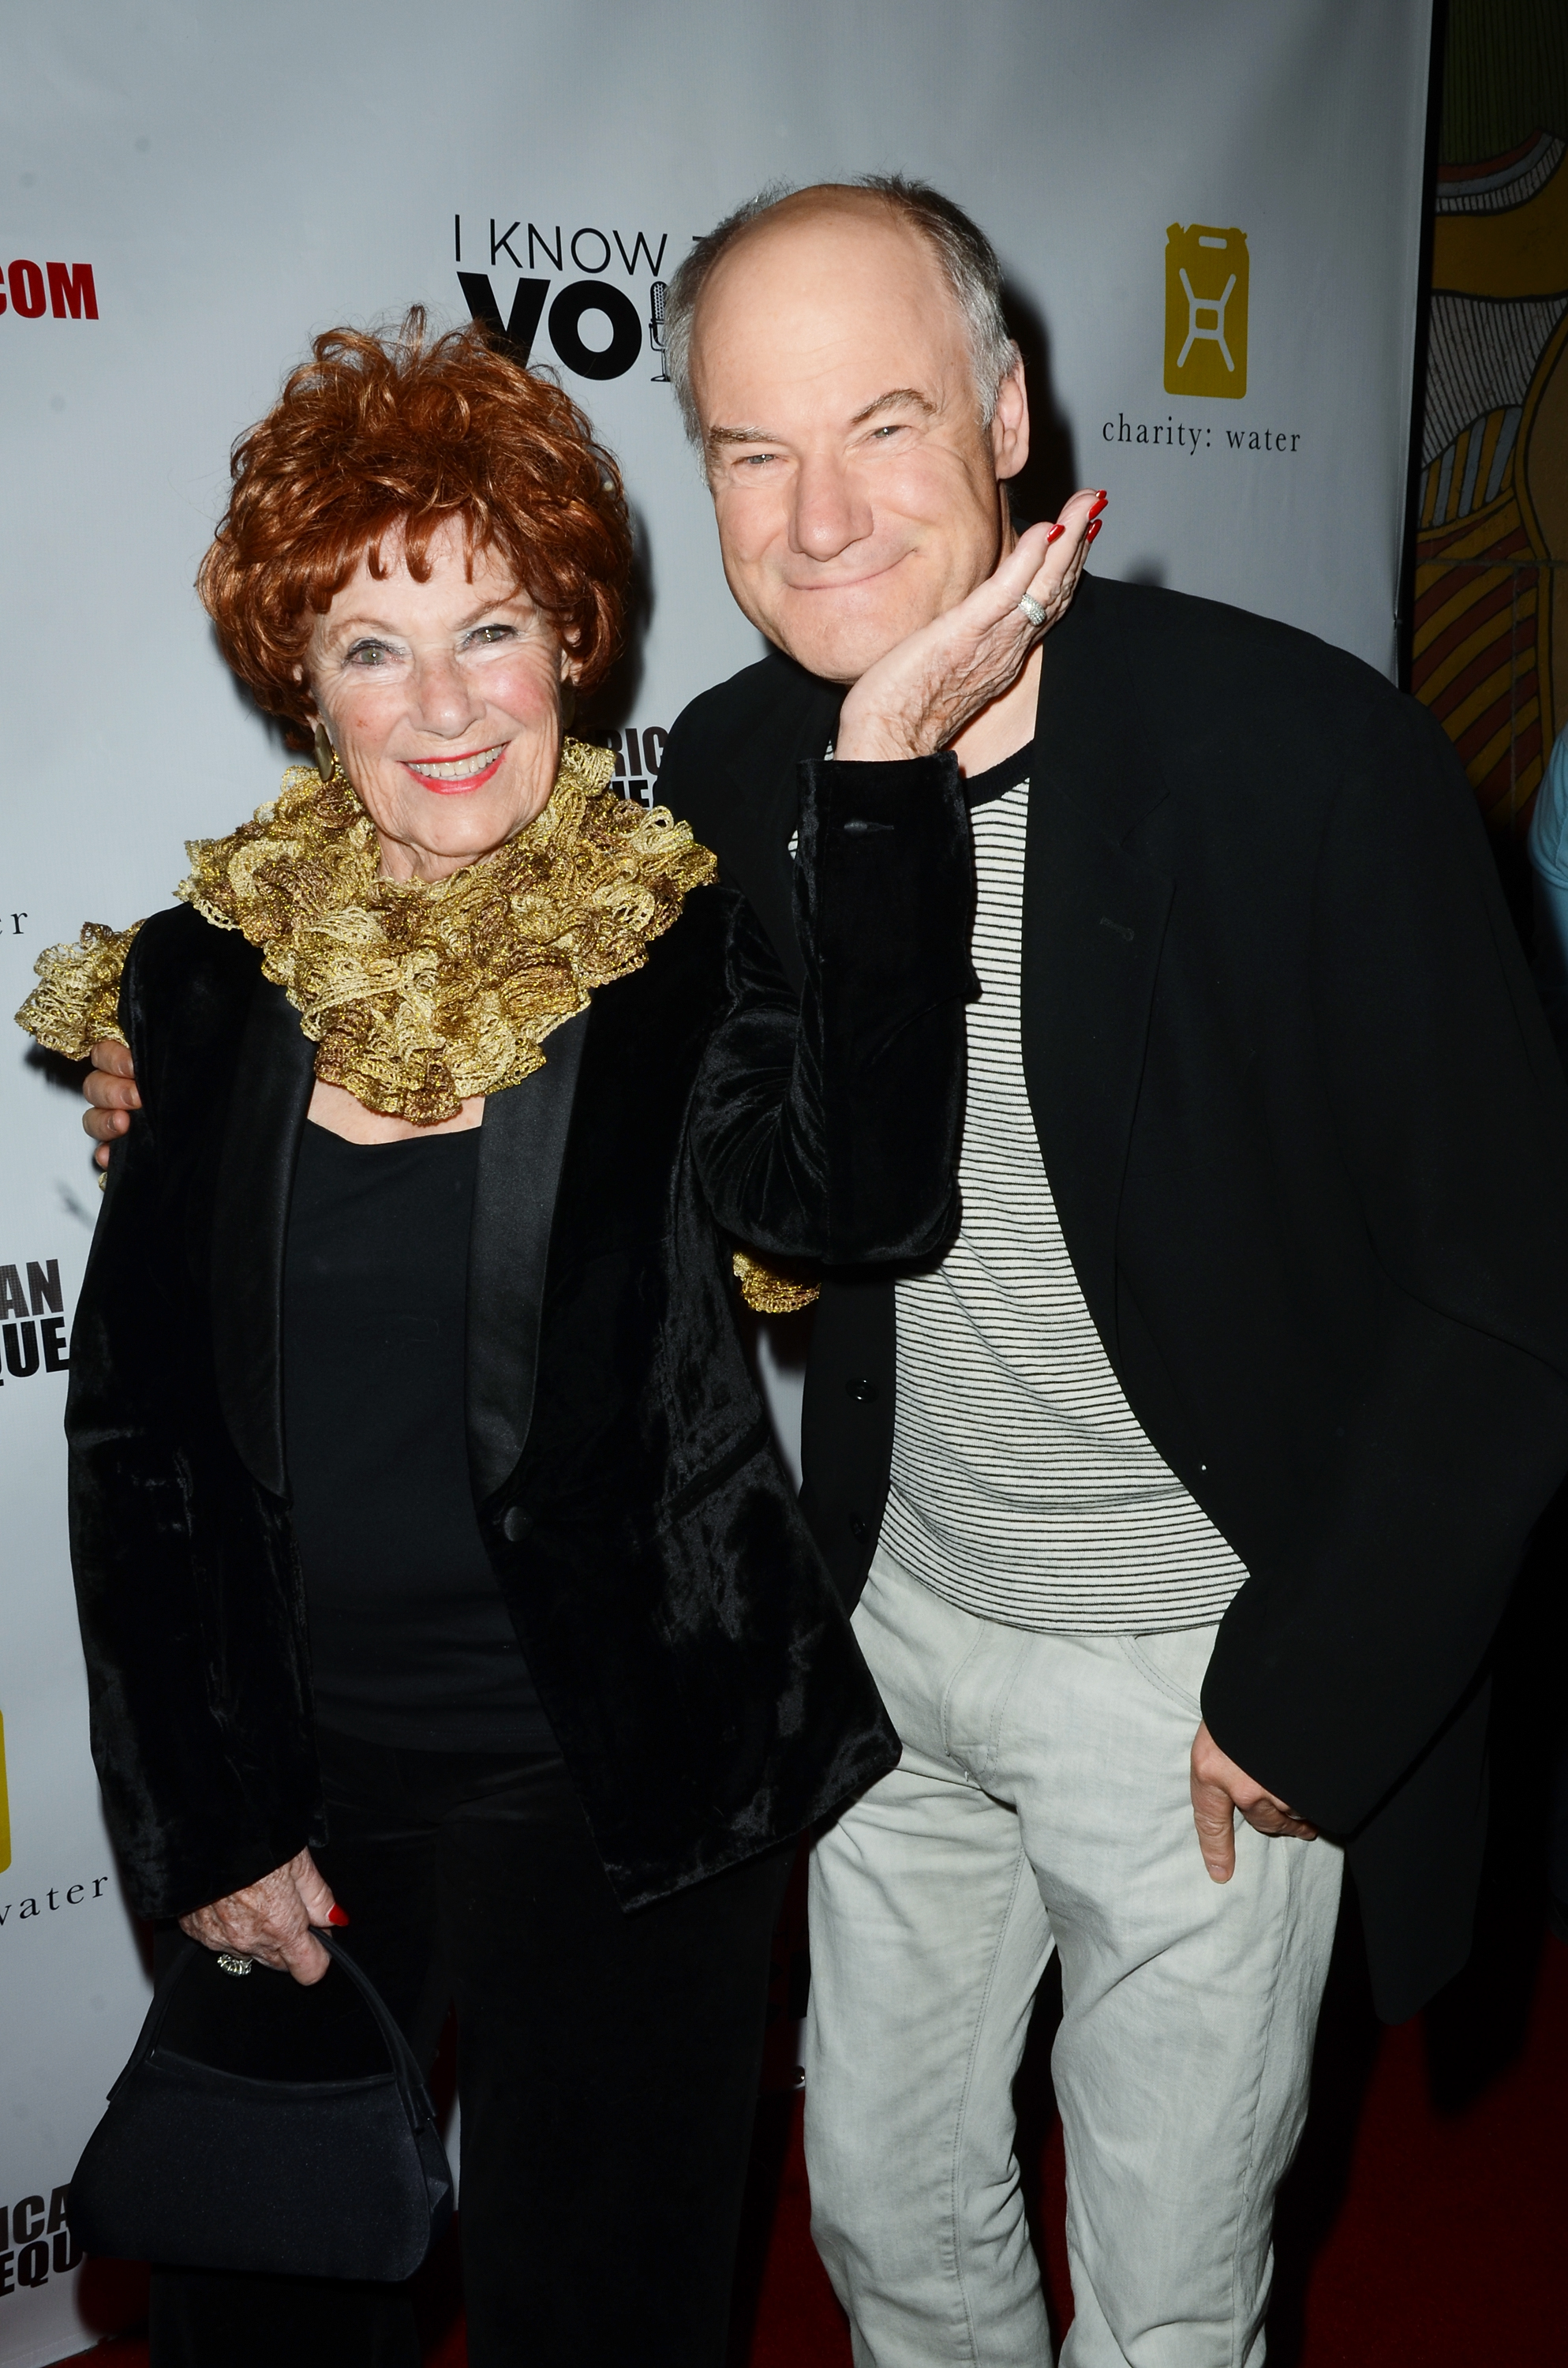 Marion Ross and her son Jim arrive at "I Know That Voice" Los Angeles premiere at American Cinematheque's Egyptian Theatre on November 6, 2013 in Hollywood, California | Source: Getty Images